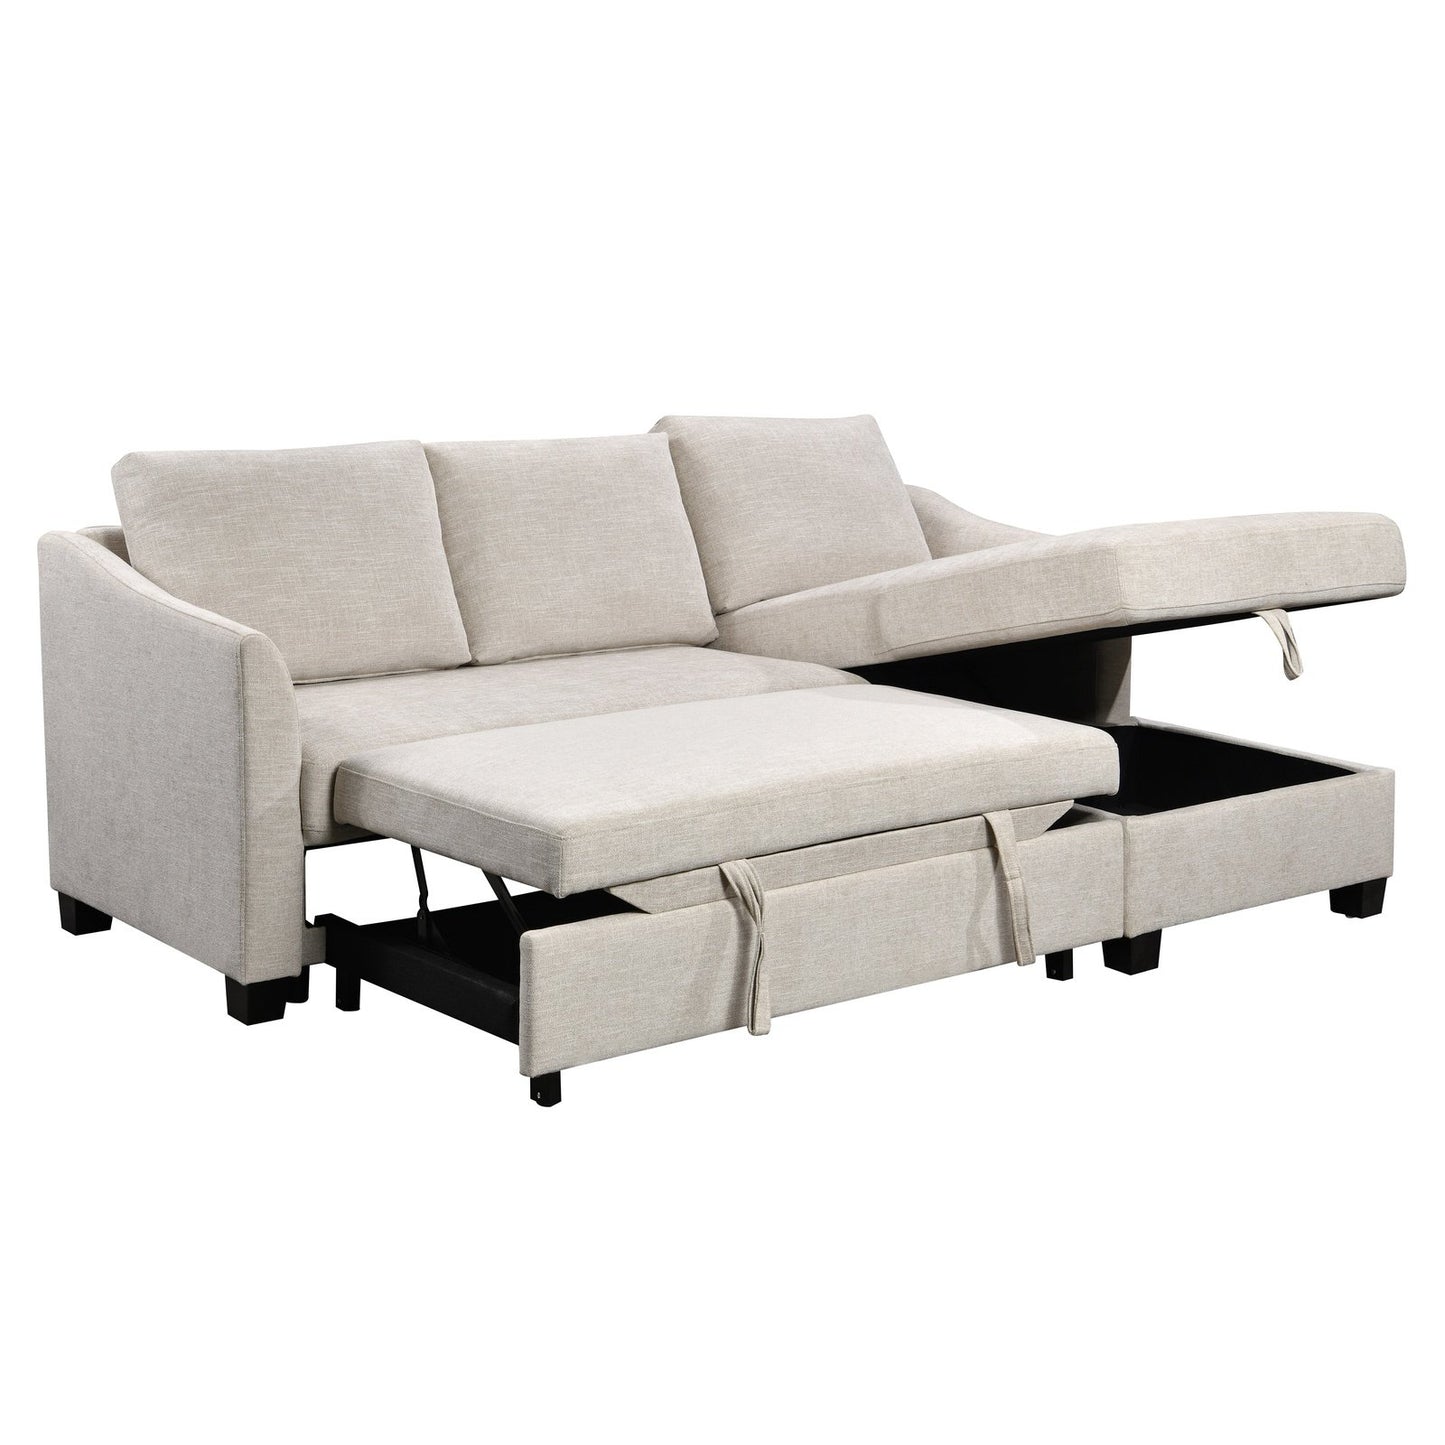 SELINA SOFABED WITH STORAGE CHAISE